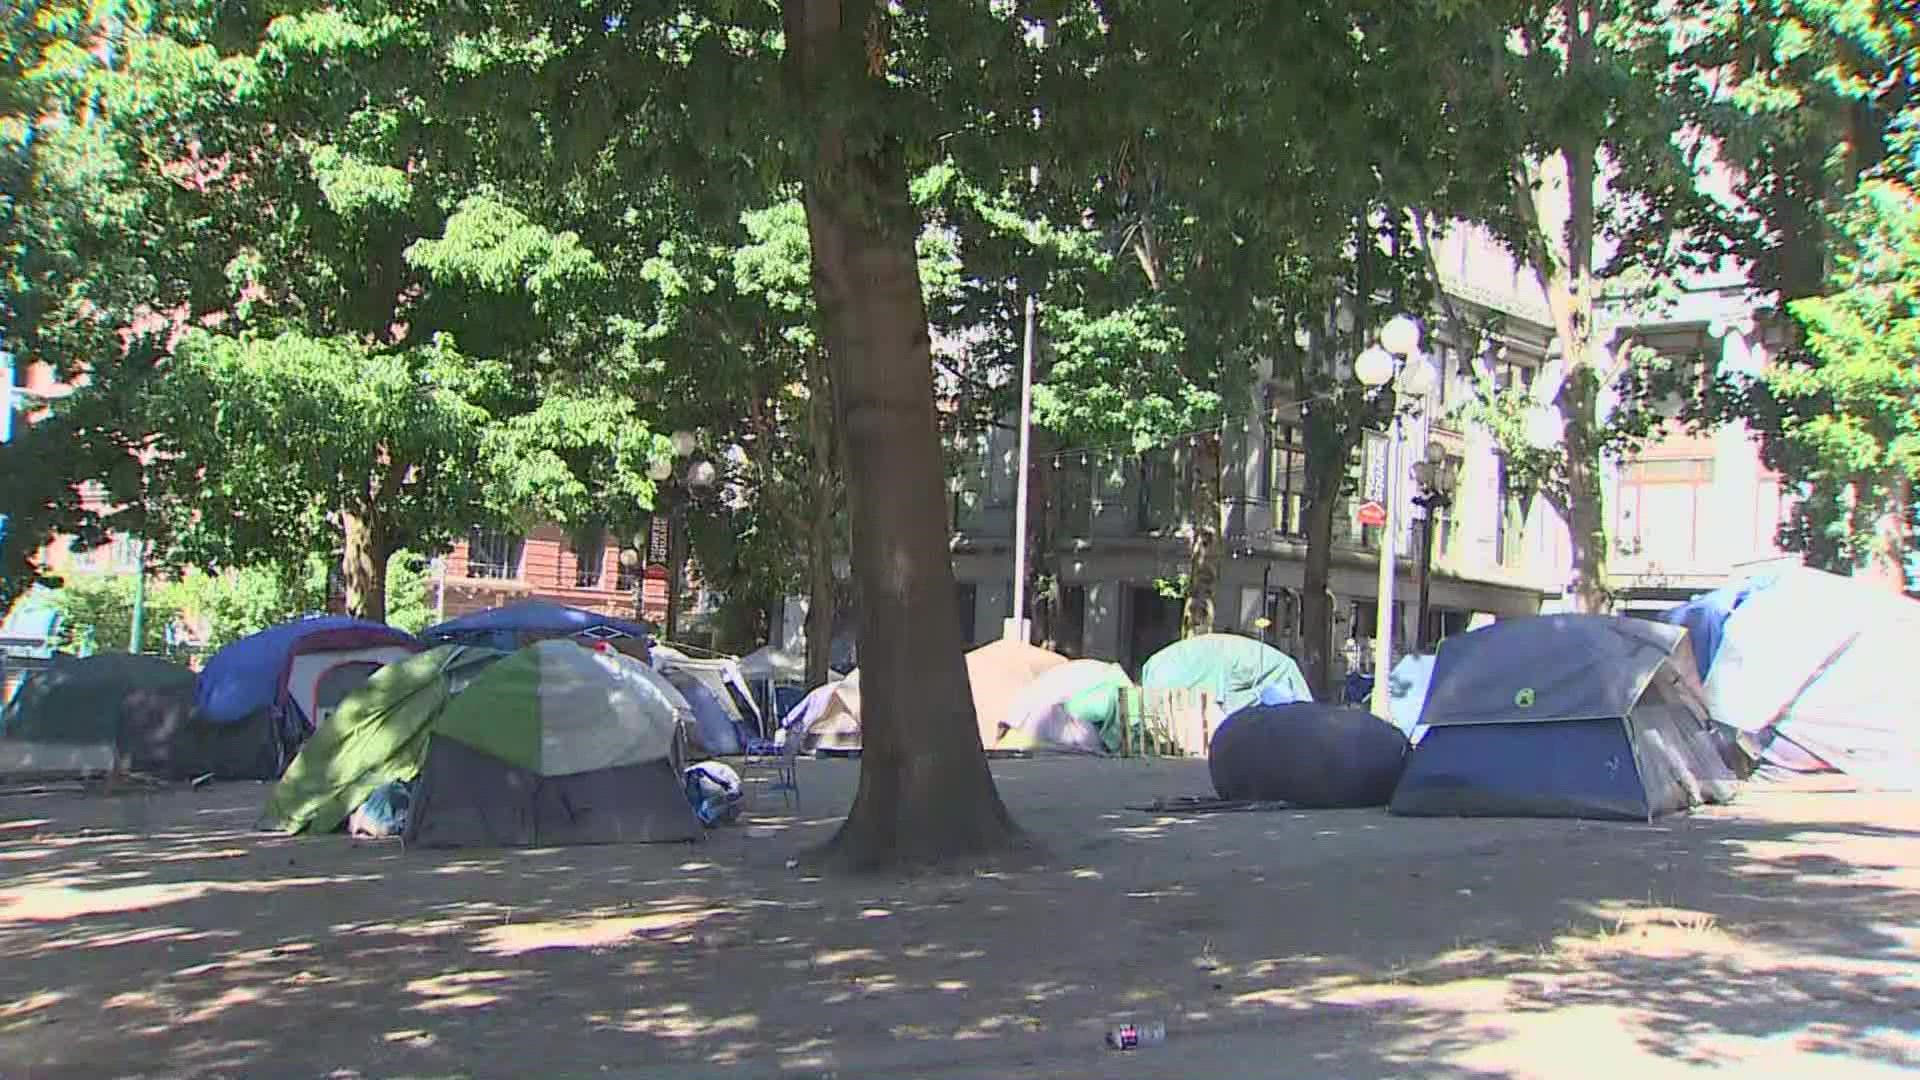 The encampment has been largely blamed for safety concerns in the area, including numerous incidents near and inside the King County Superior Court.